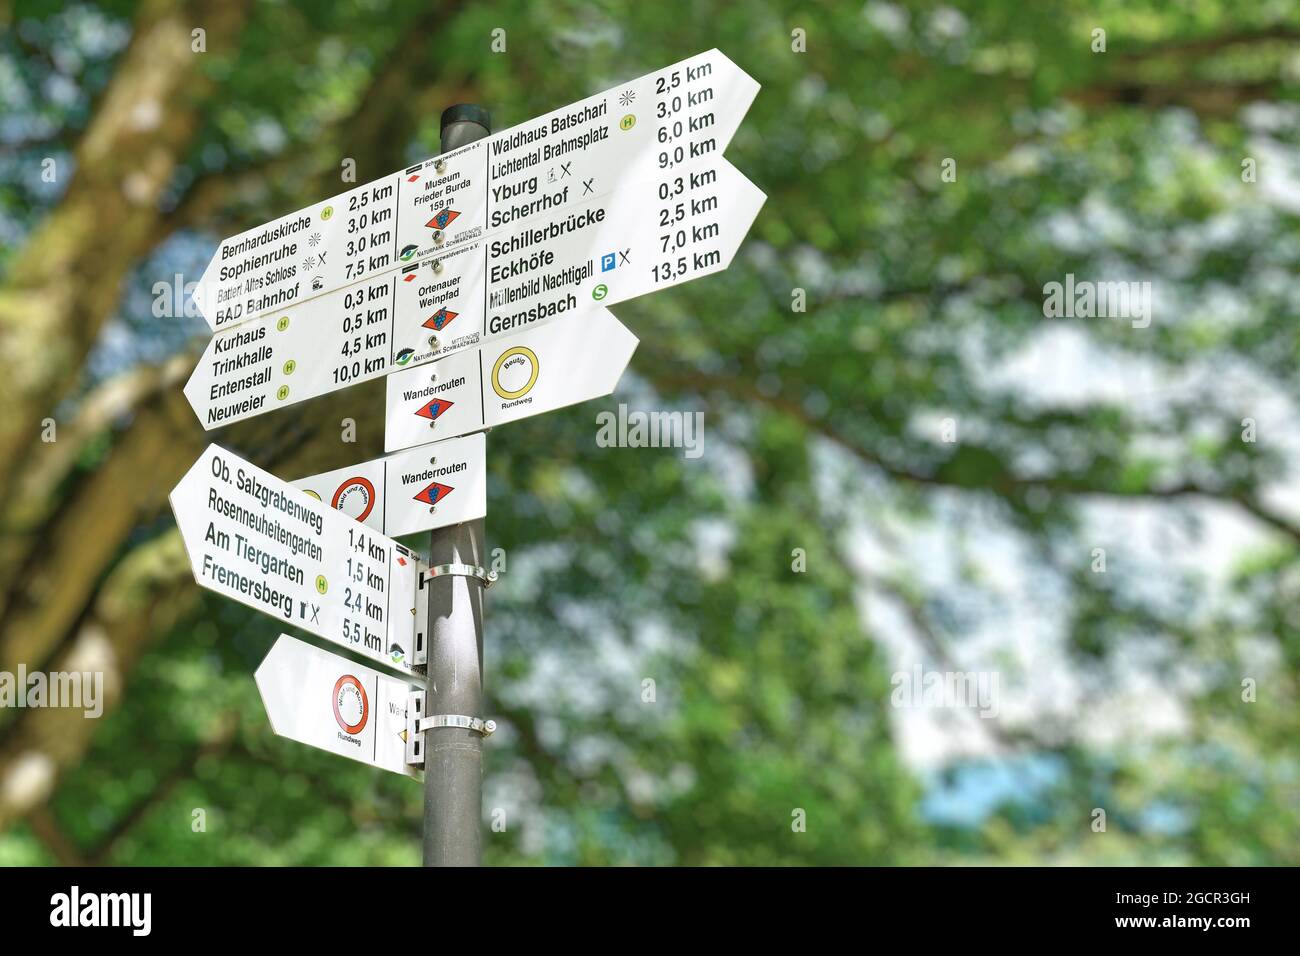 Baden-Baden, Germany - July 2021: Signpost with signs showing directions and distance to various sight seeing place of interest in world heritage site Stock Photo